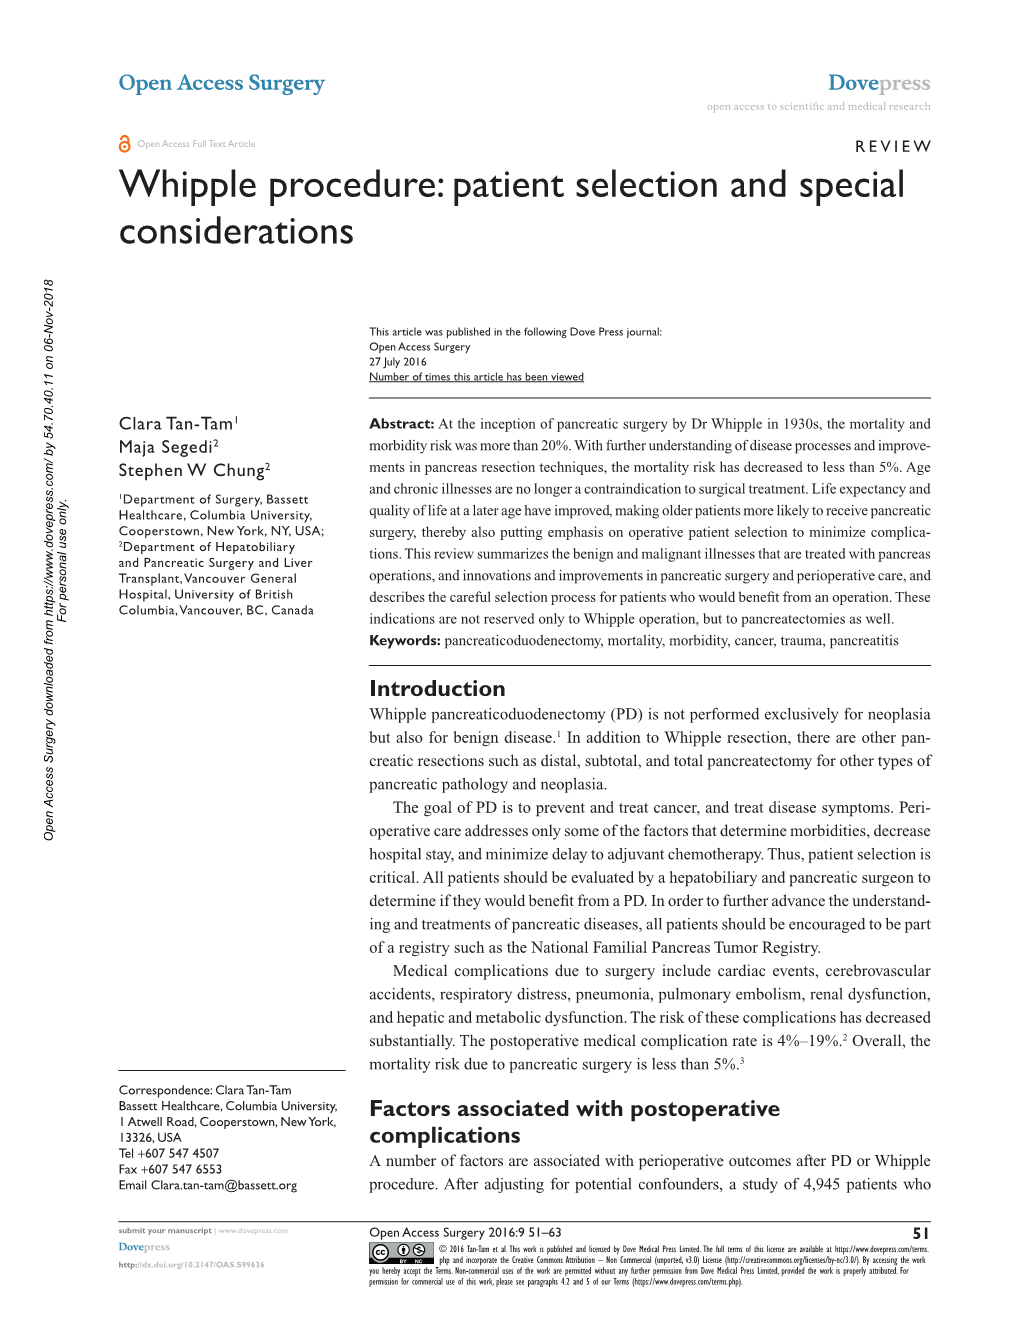 Whipple Procedure: Patient Selection and Special Considerations